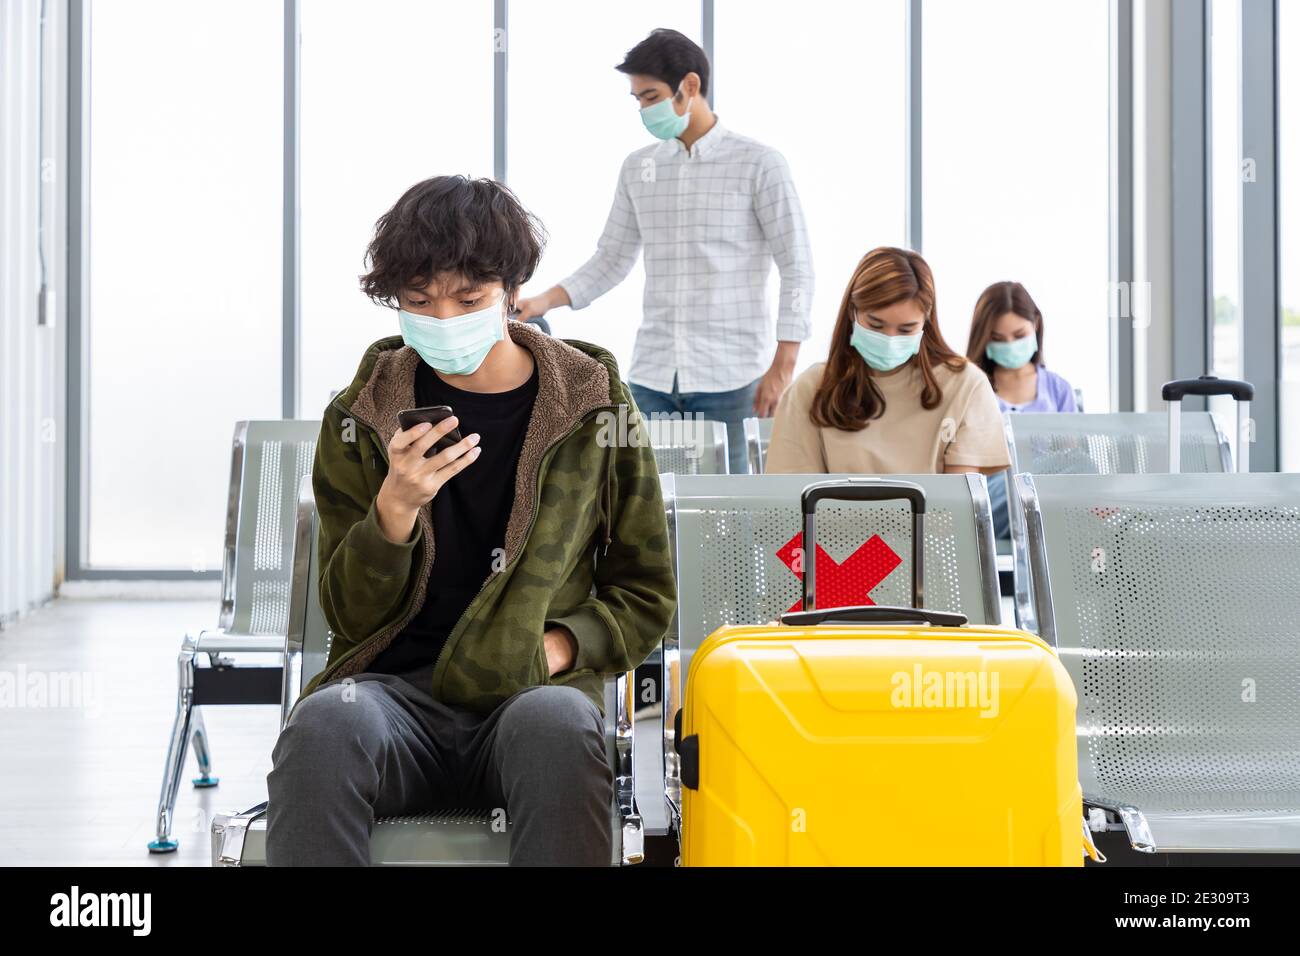 Travelers wearing protective mask in International airport, during Covid-19 pandemic, safety with social distancing protocol, new normal travel concep Stock Photo